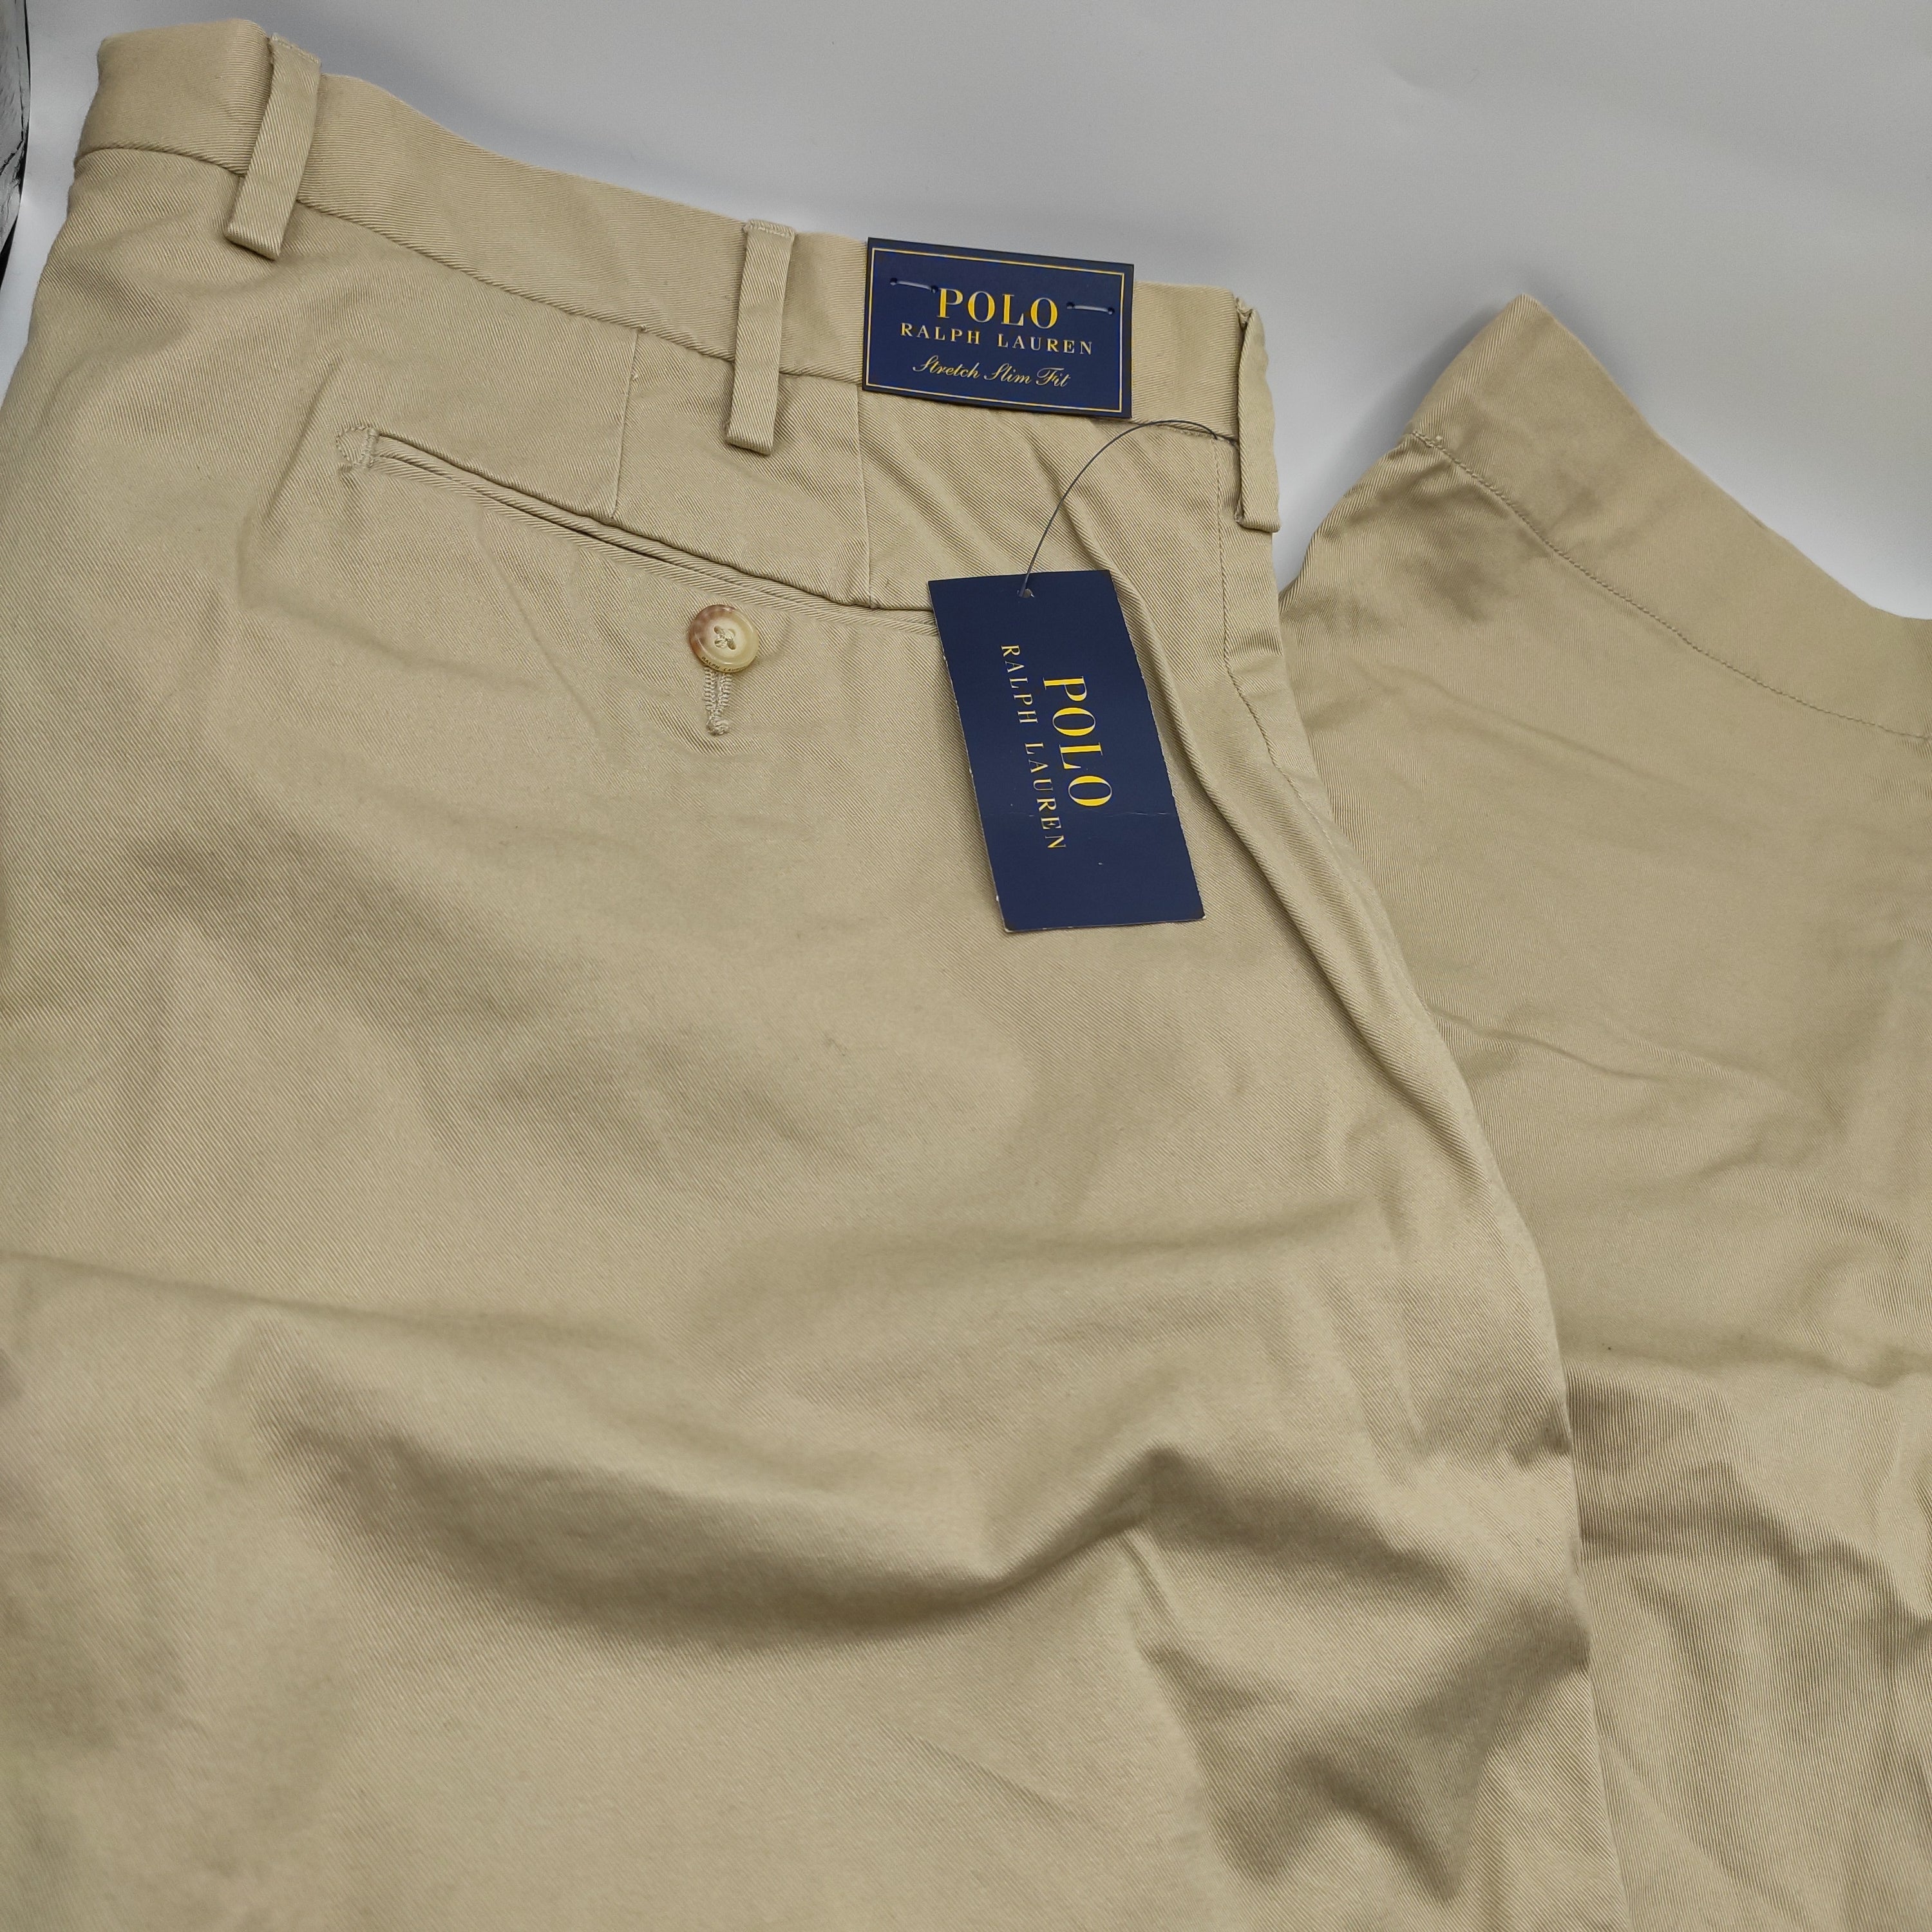 Polo Ralph Lauren  Flat Chino Trousers  Chinos  House of Fraser